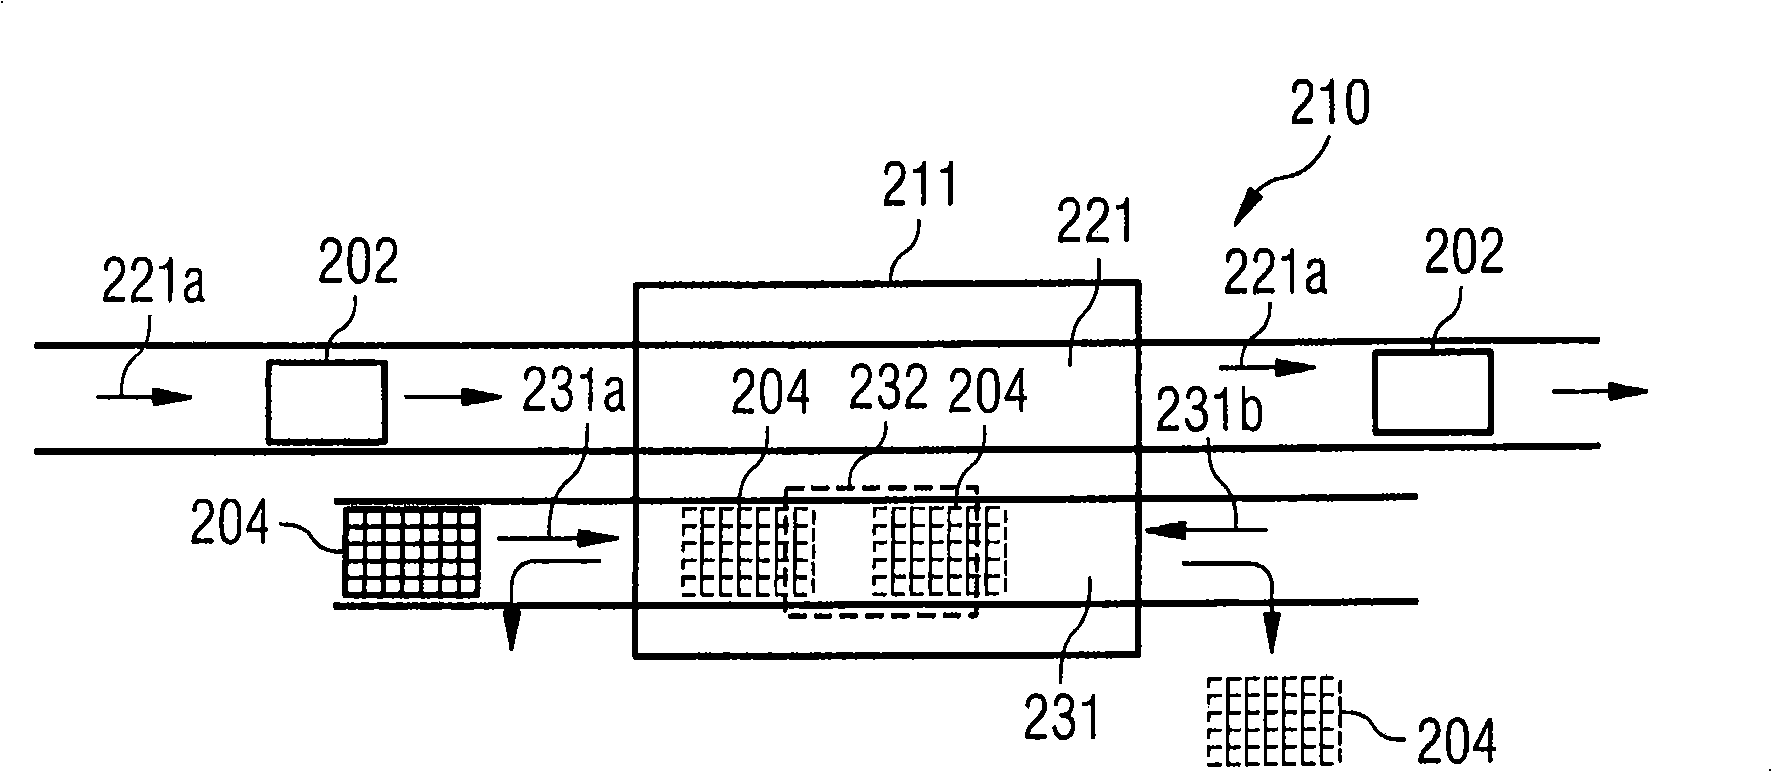 Supply of magazines via the conveyor of a circuit board transport system with multiple conveyor paths